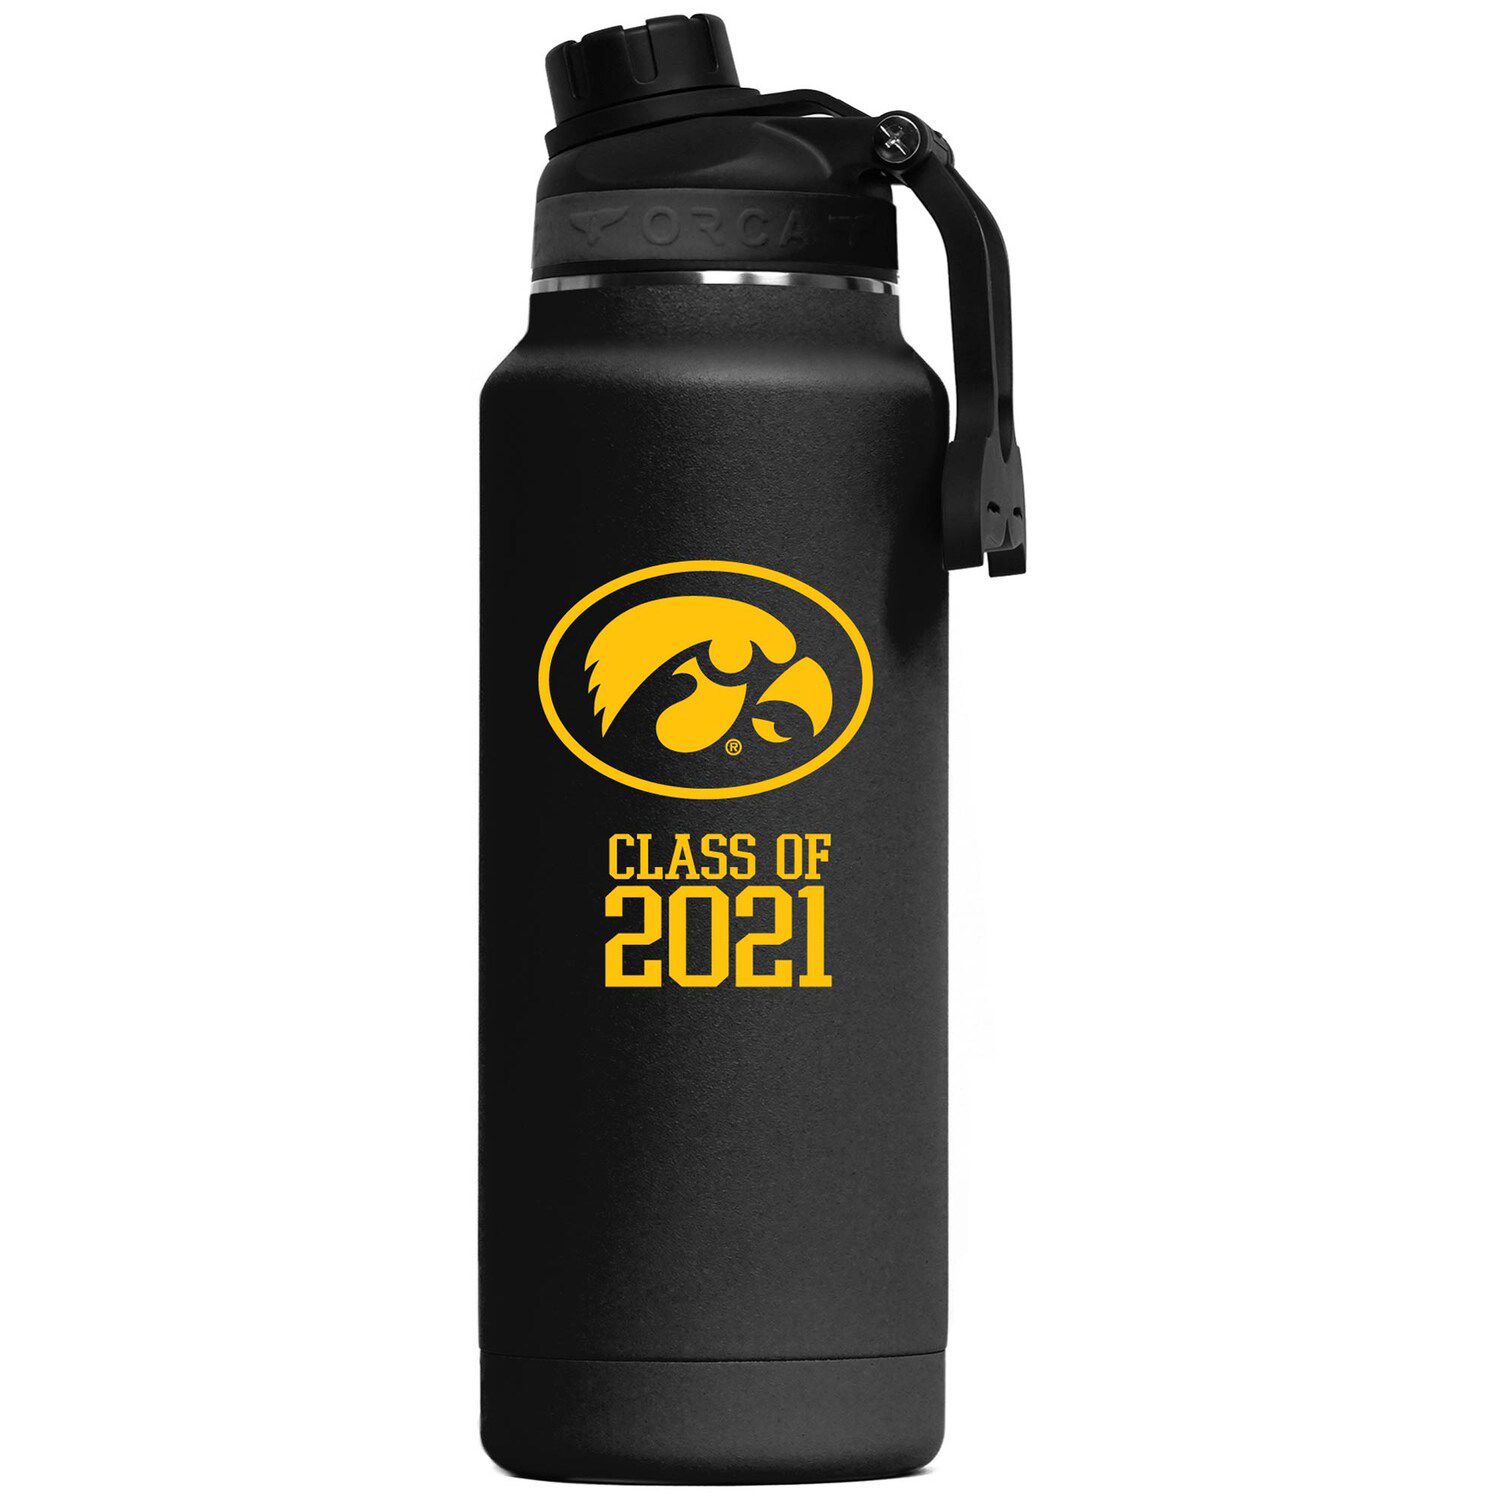 Image for Unbranded ORCA Iowa Hawkeyes 34oz. Class of 2021 Hydra Water Bottle at Kohl's.